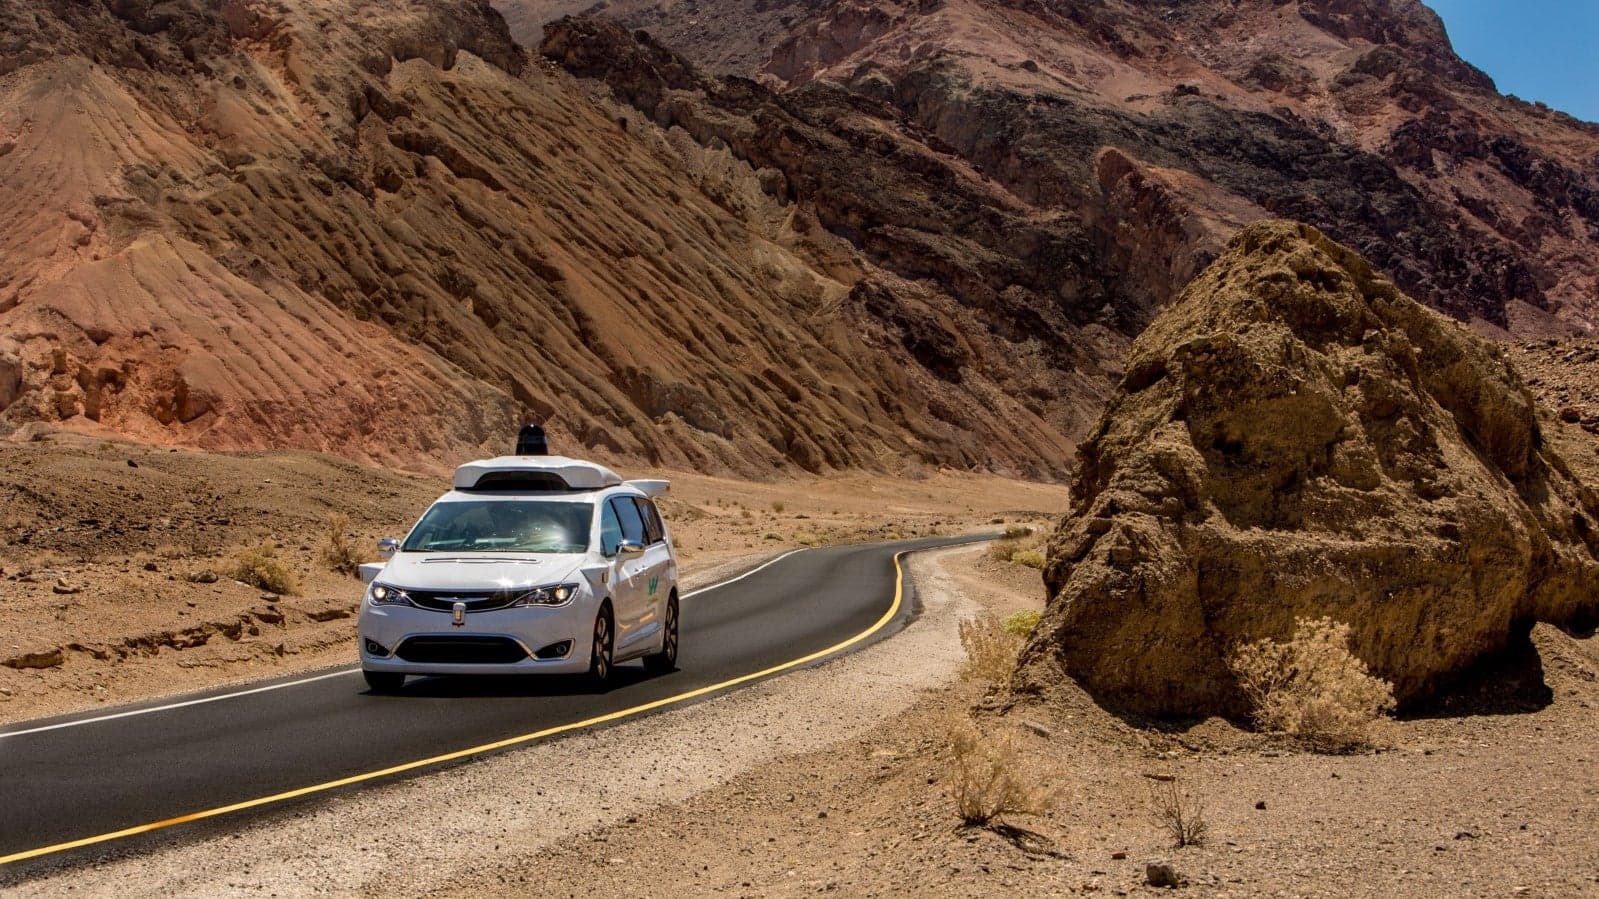 Waymo Took a Self-Driving Car to Death Valley for Extreme Heat Testing